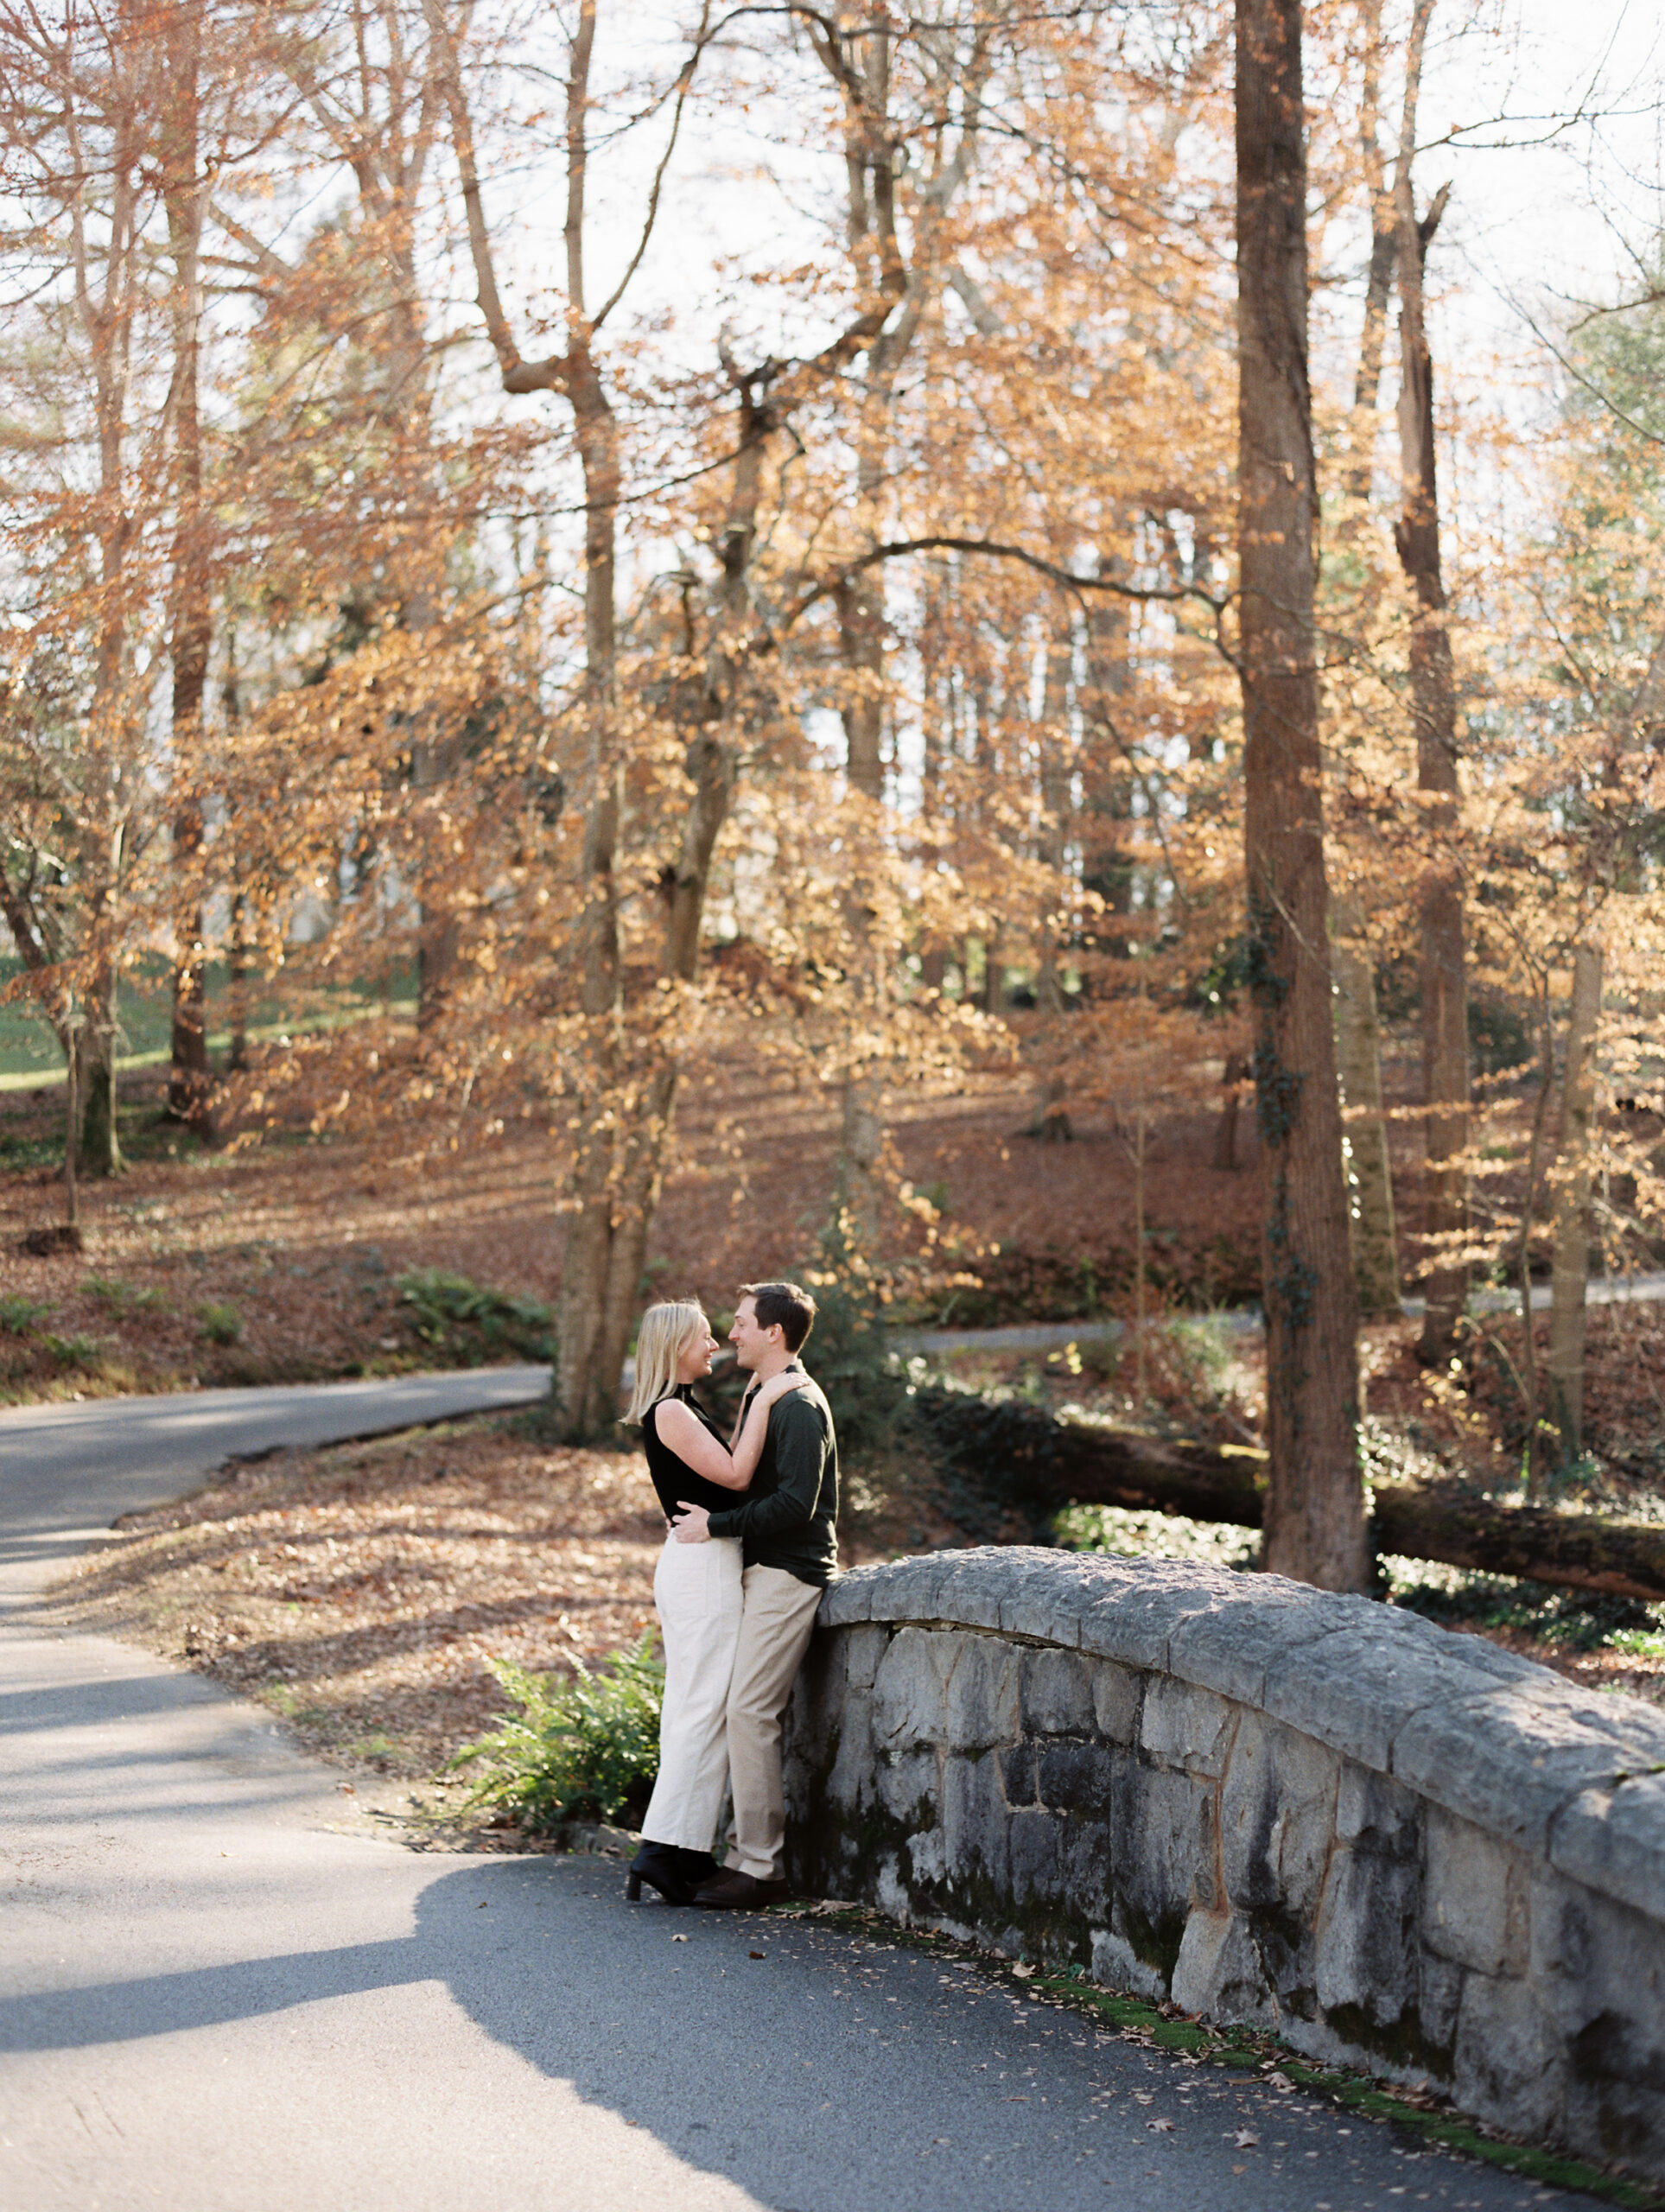 Cator Woolford Engagement Photographer